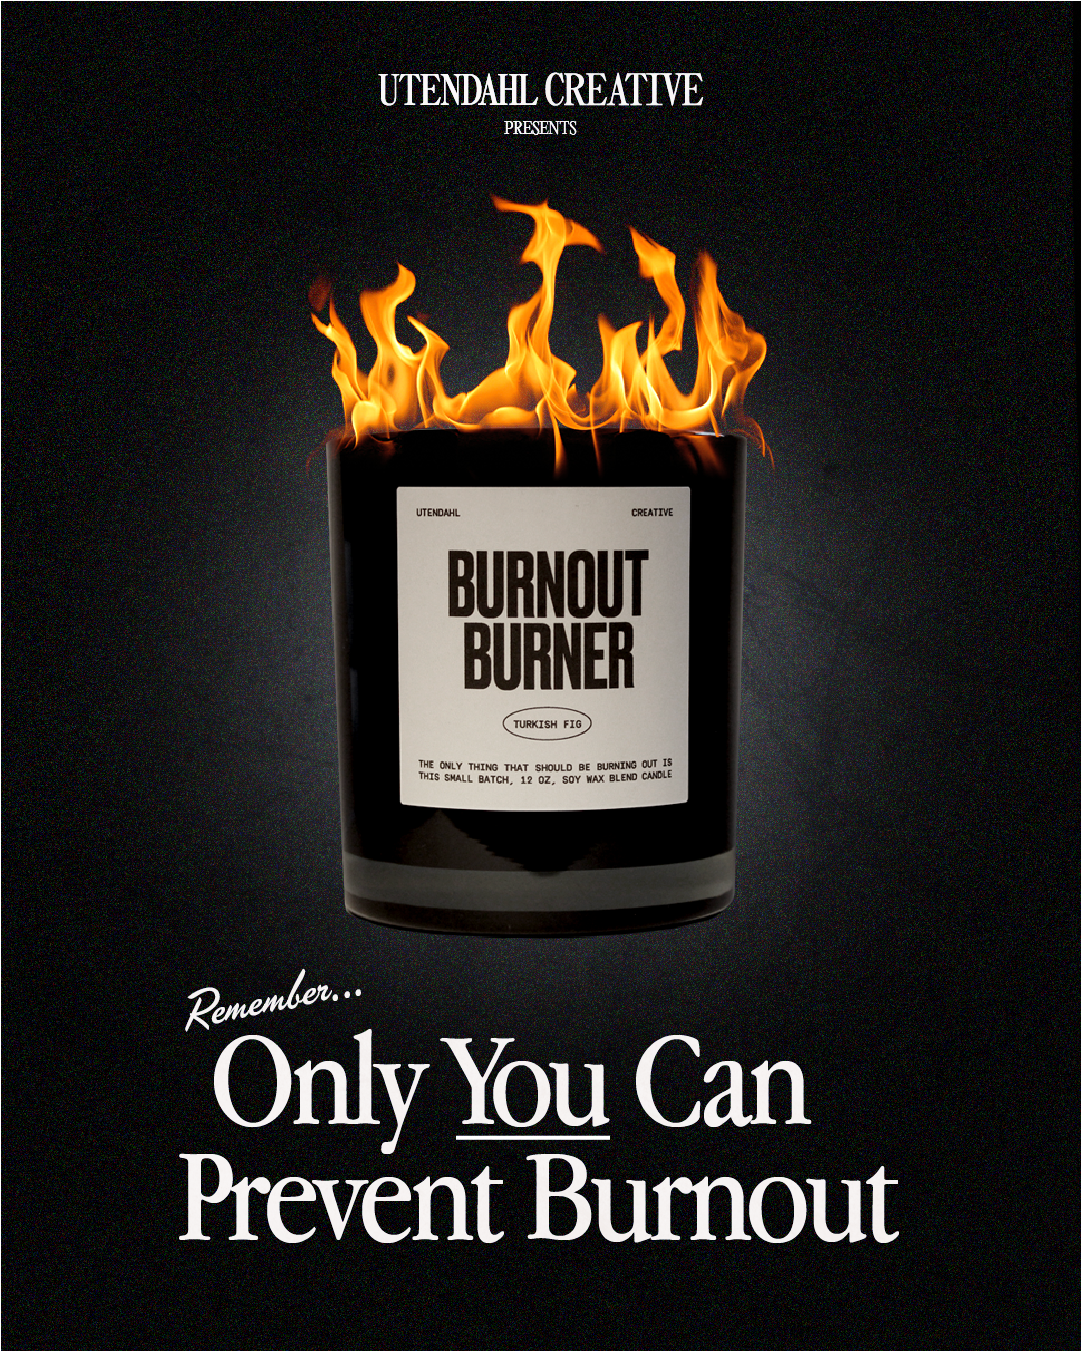 Are You Burnt Out? Utendahl Creative Has The Perfect Candle For You